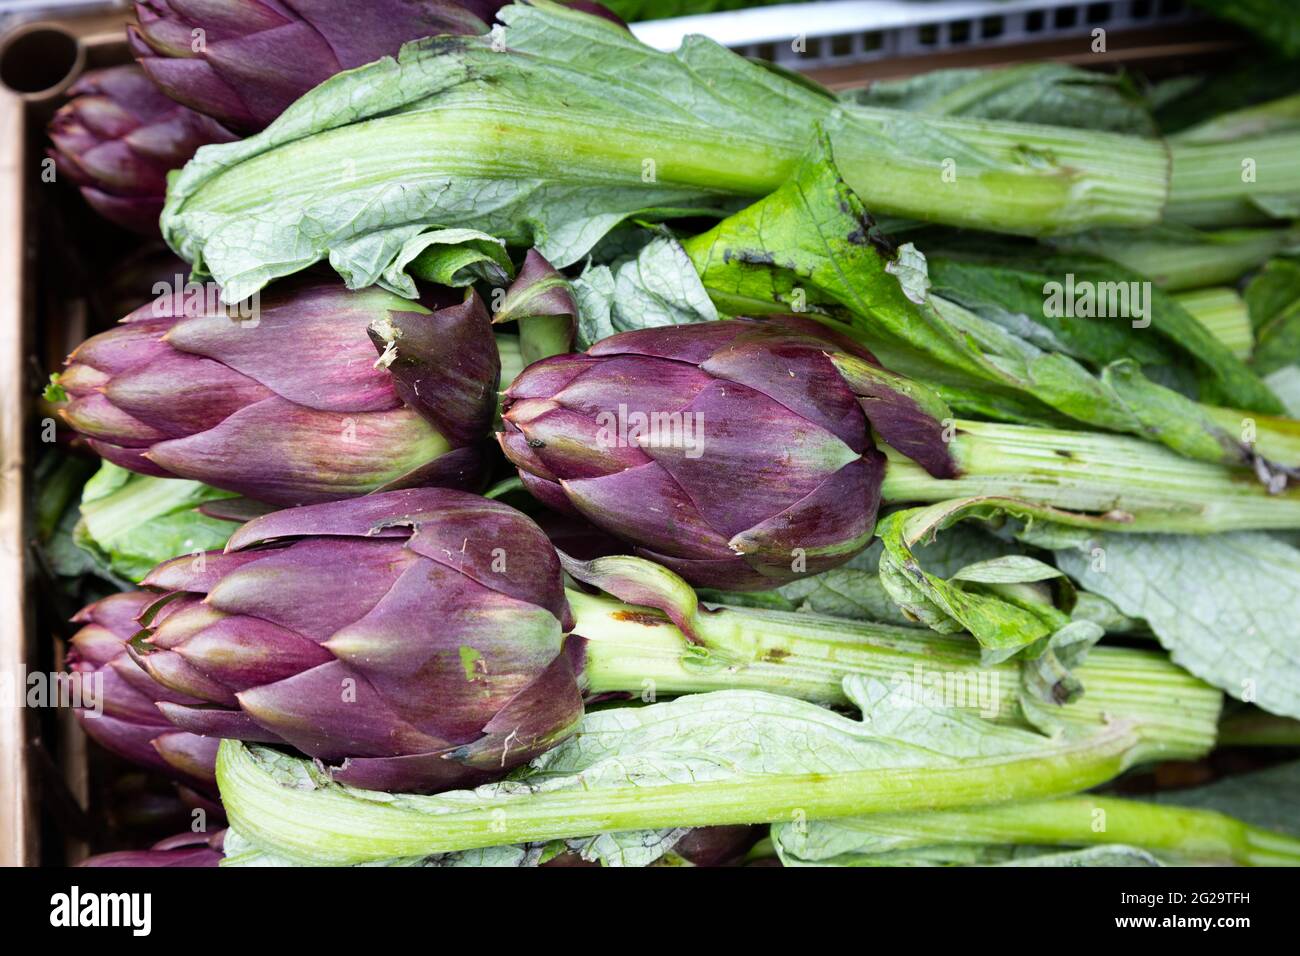 Delicate purple artichokes are offered at the weekly market in Venice Stock Photo